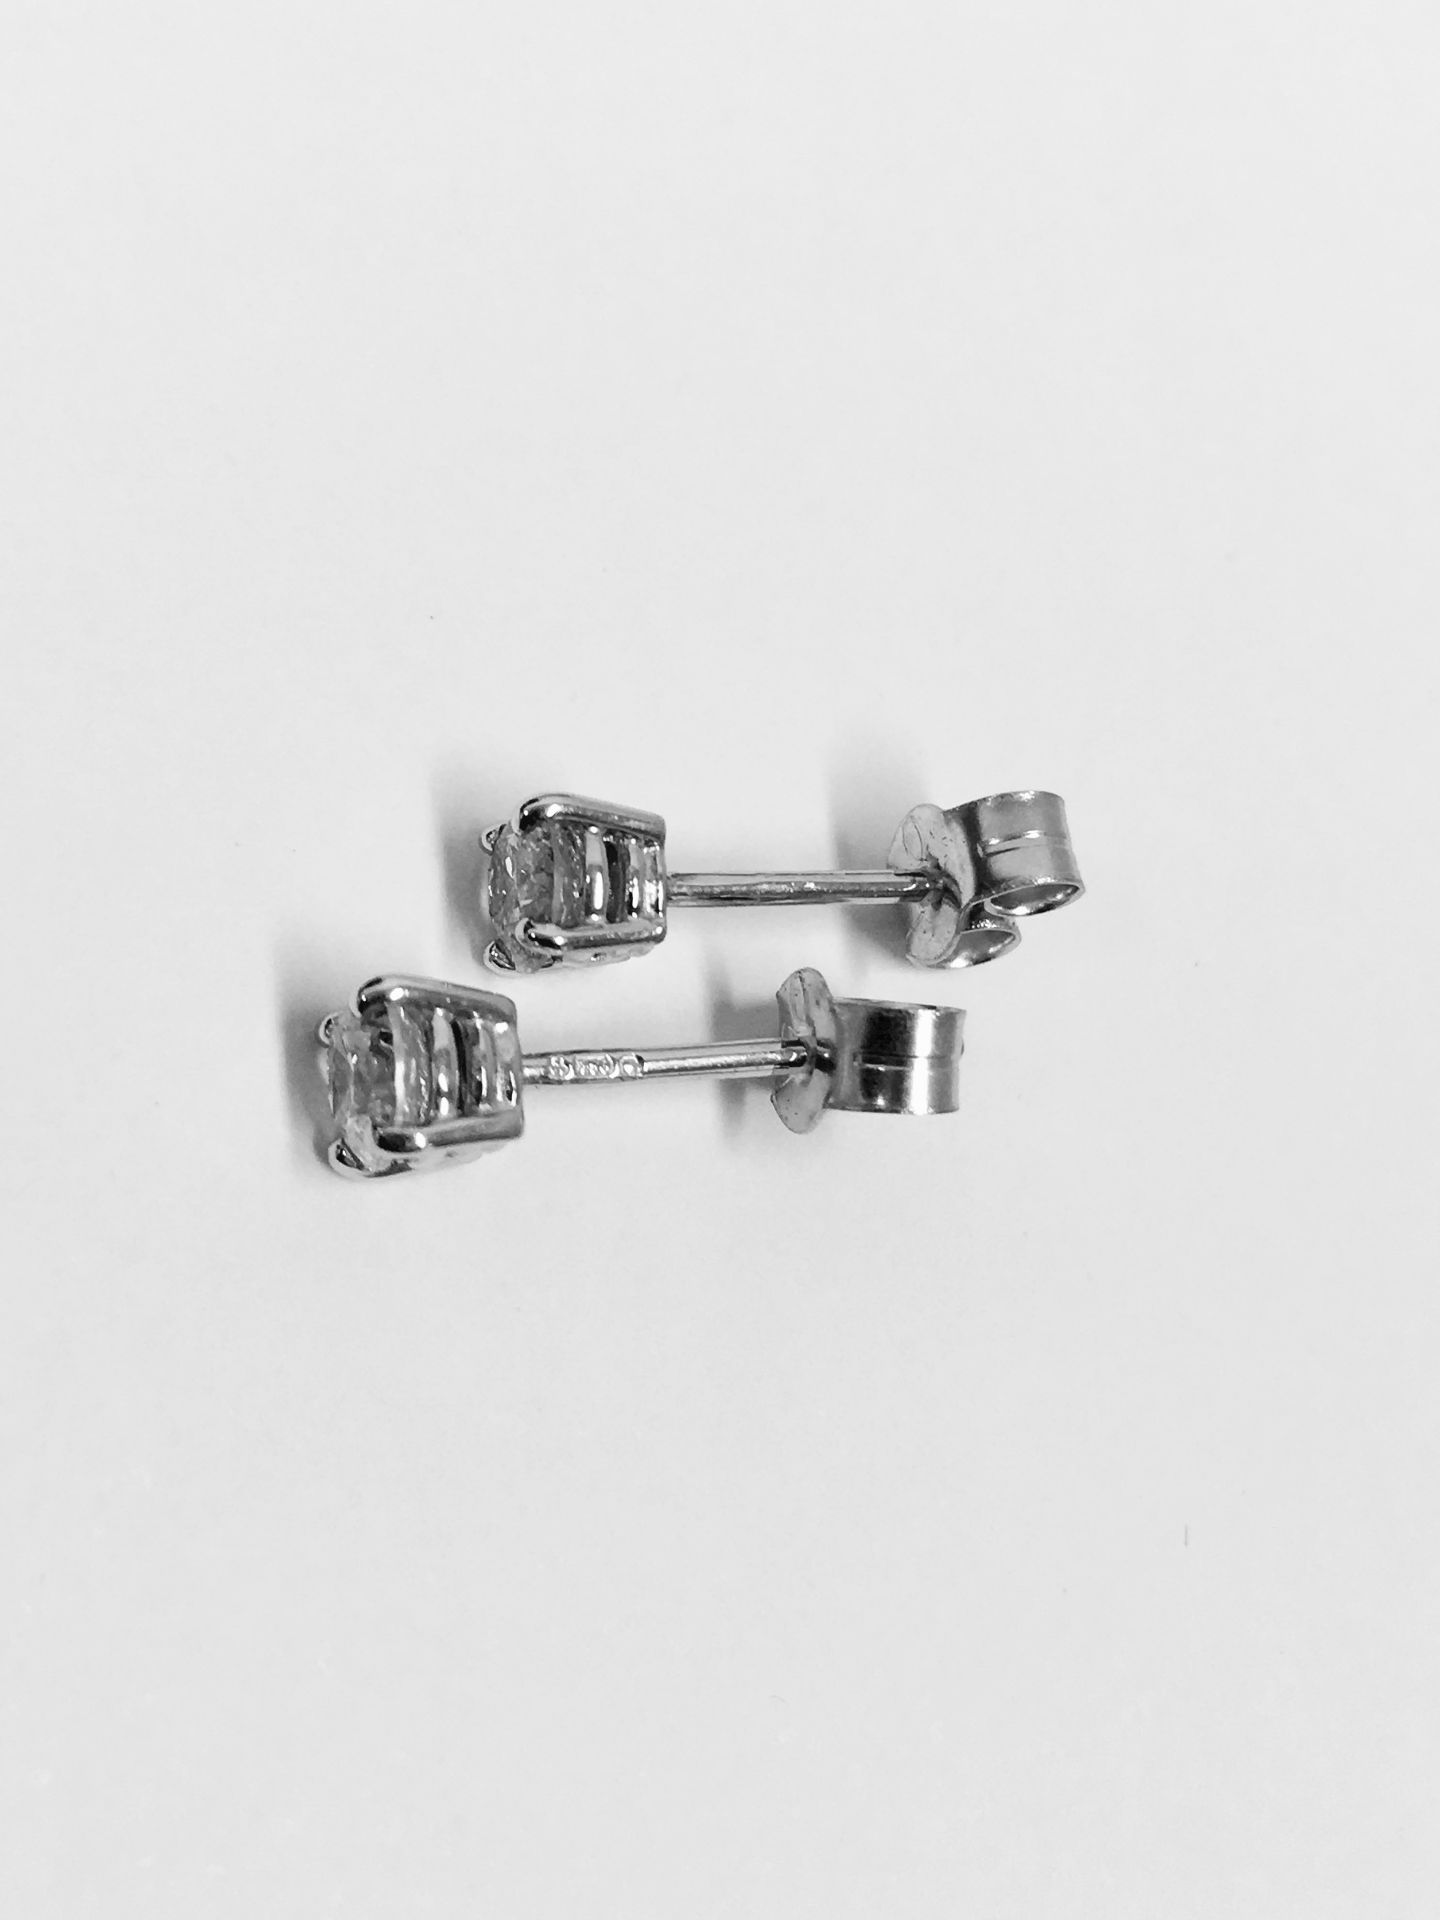 0.66ct Solitaire diamond stud earrings set with brilliant cut diamonds, SI2 clarity and I colour. - Image 2 of 3